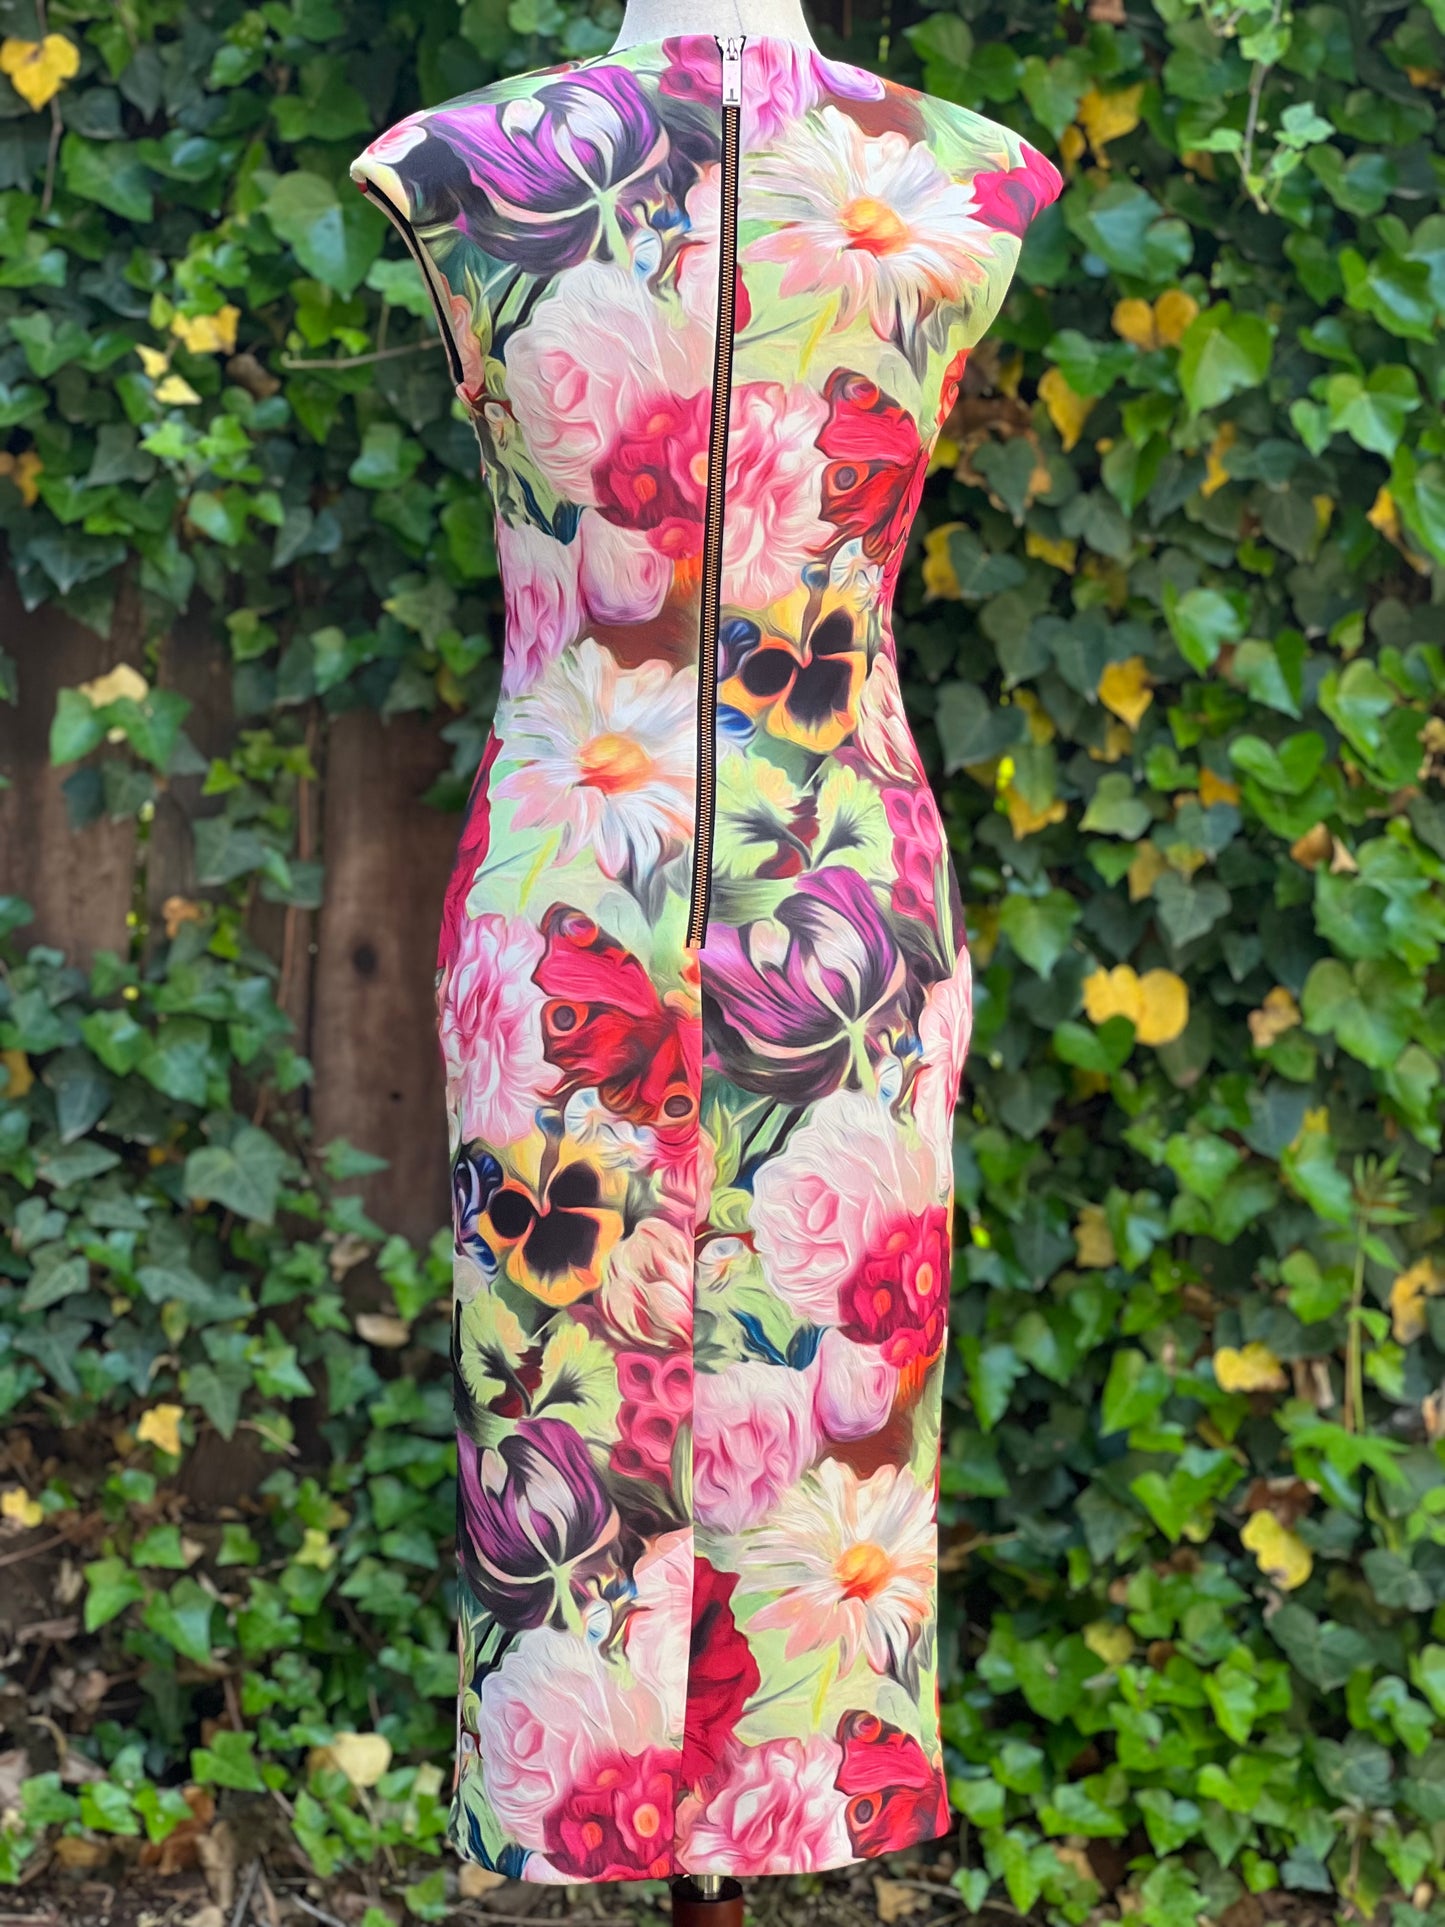 Ted Baker Floral Watercolor Neoprene Sheath Cocktail Dress Size S